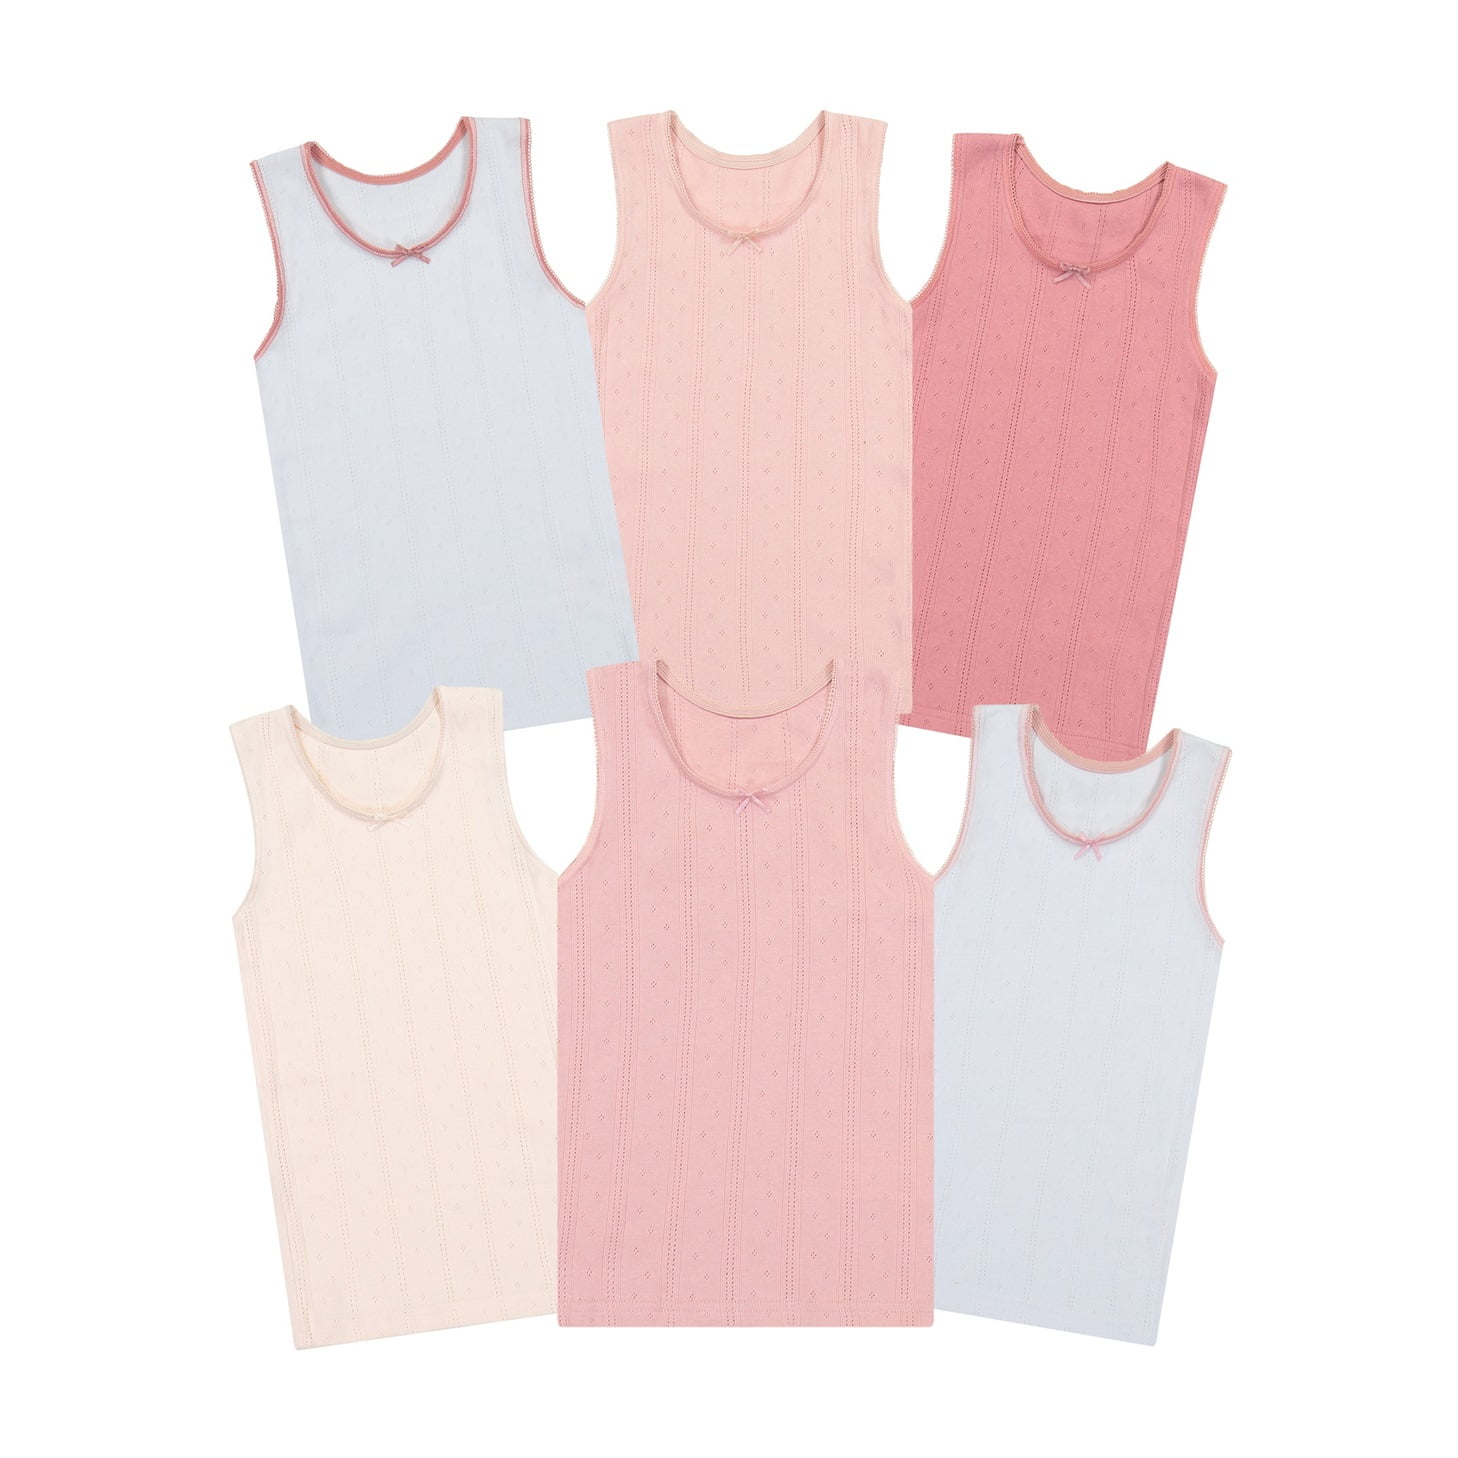 Buyless Fashion Girls Tagless Cami Scoop Neck Undershirts Cotton Tank With  Trim and Strap (6 Pack) 